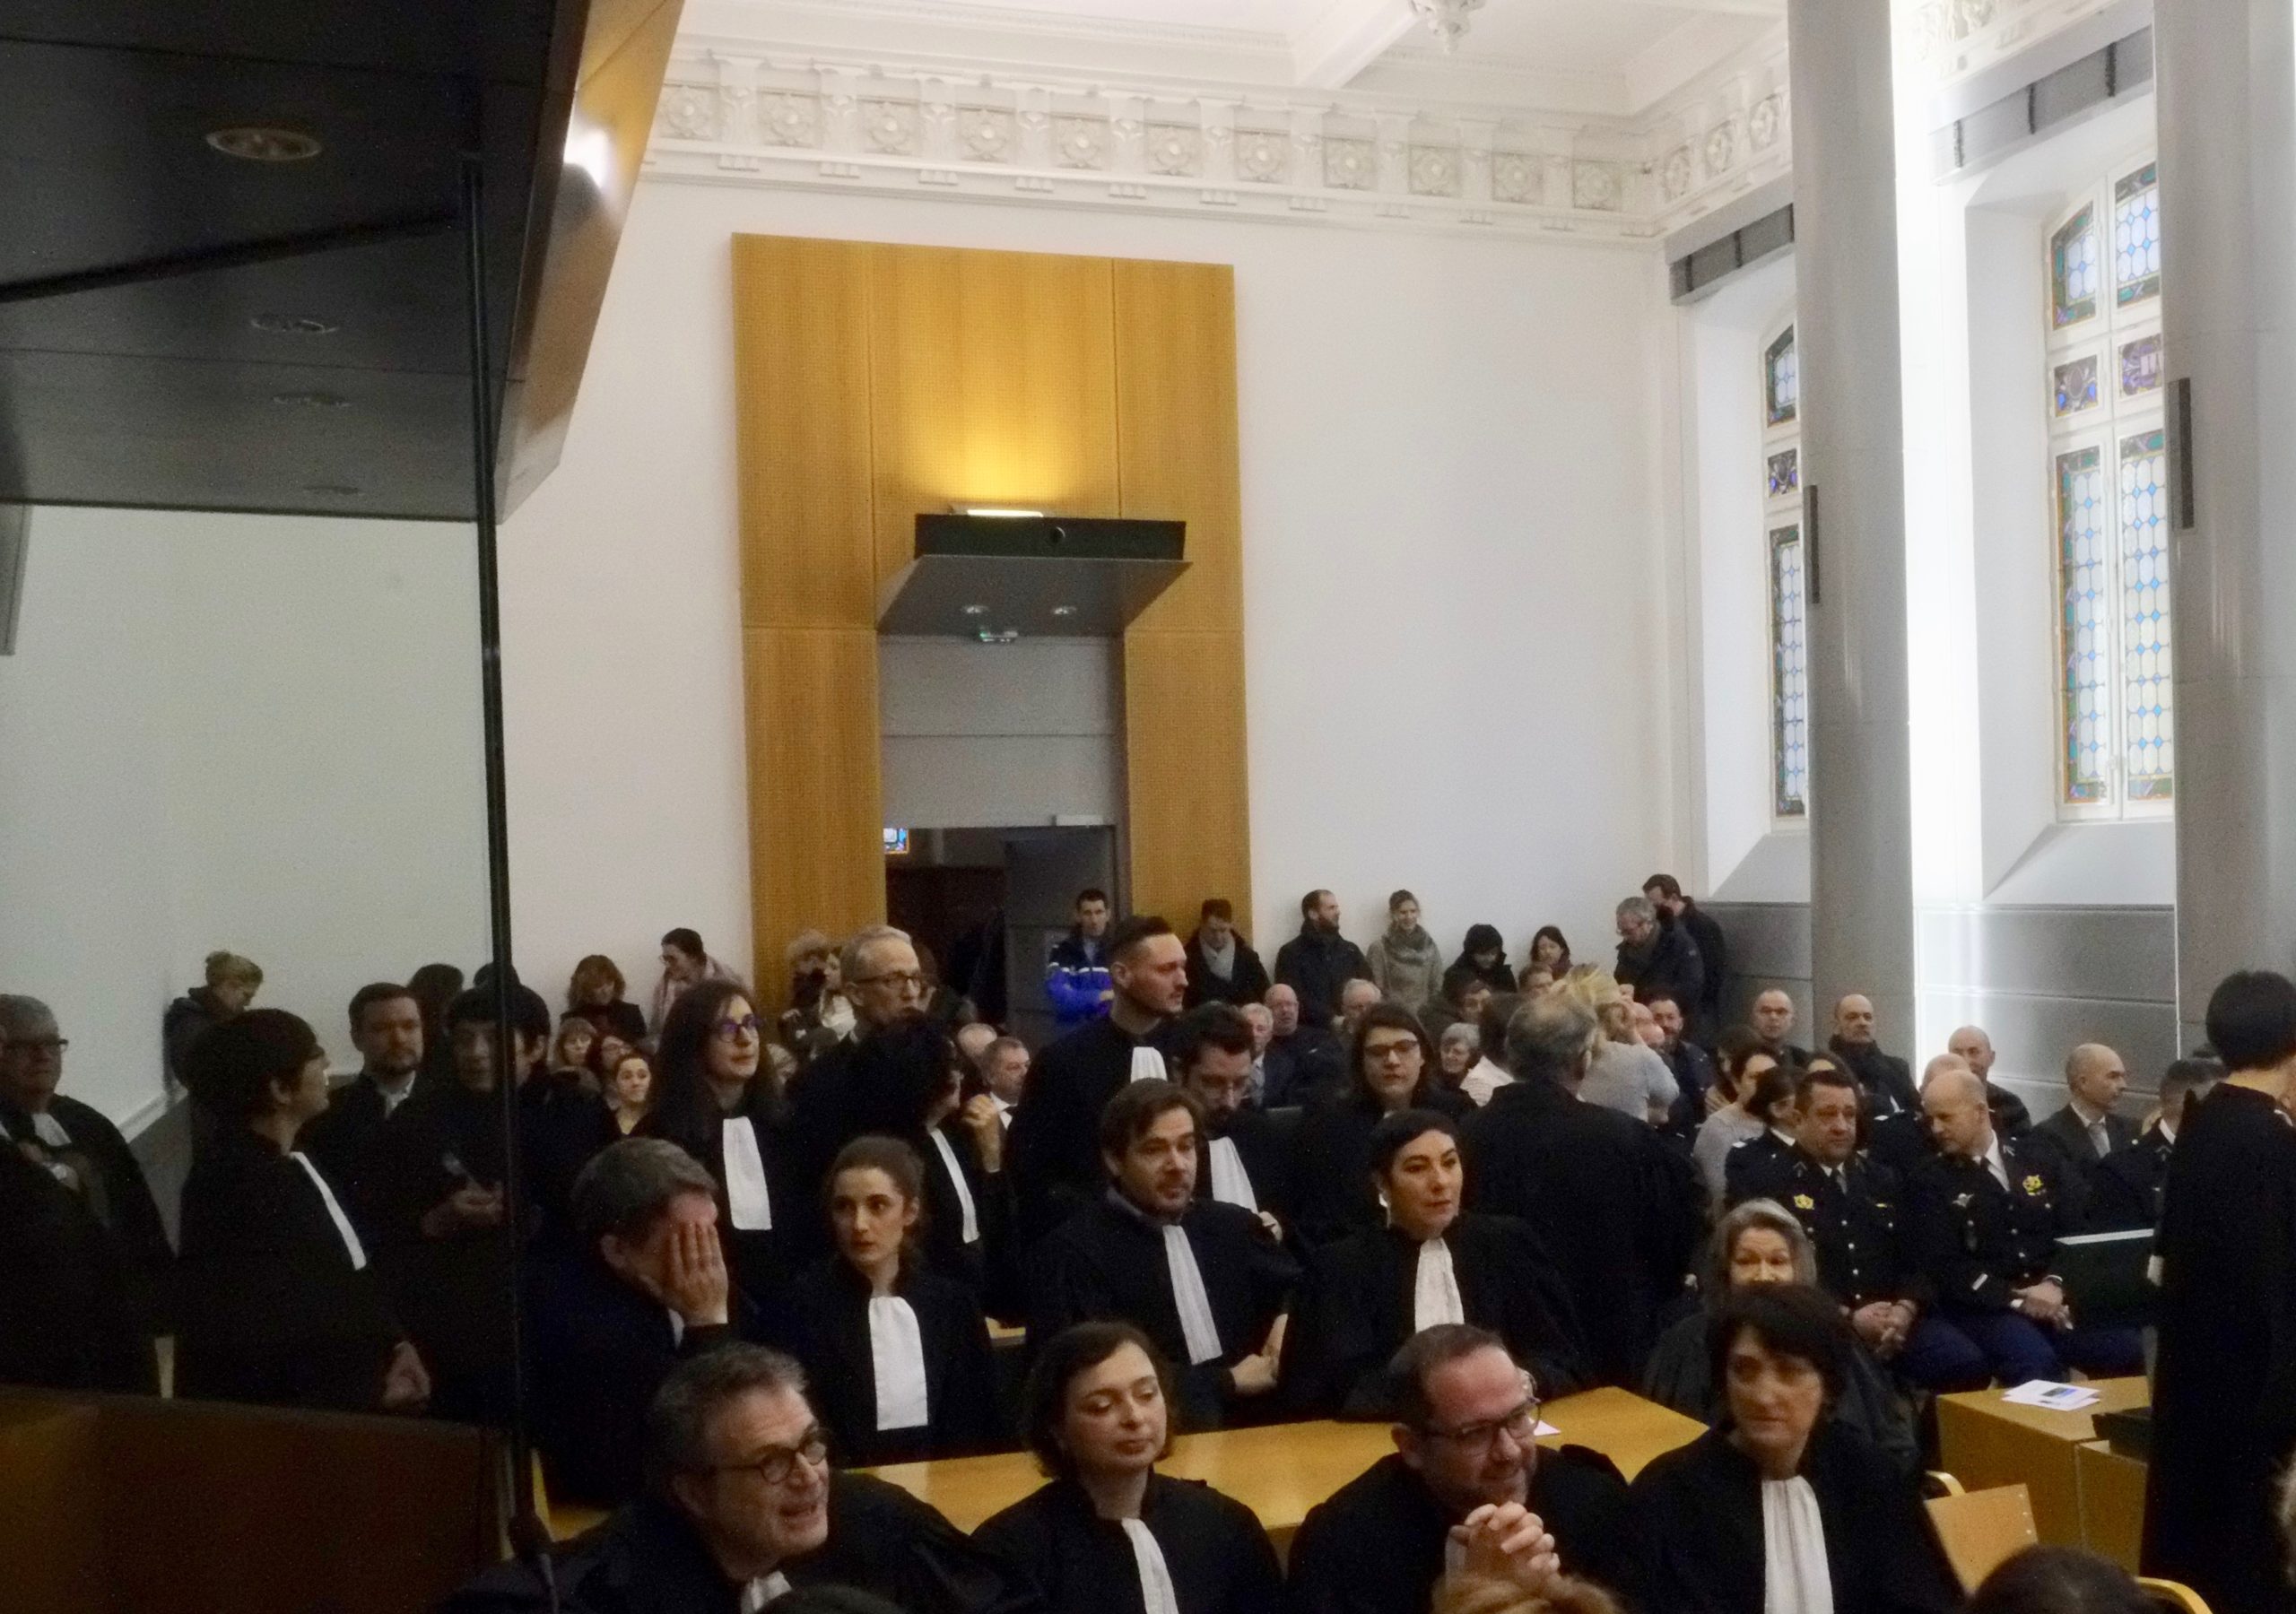 audience solennenlle tribunal